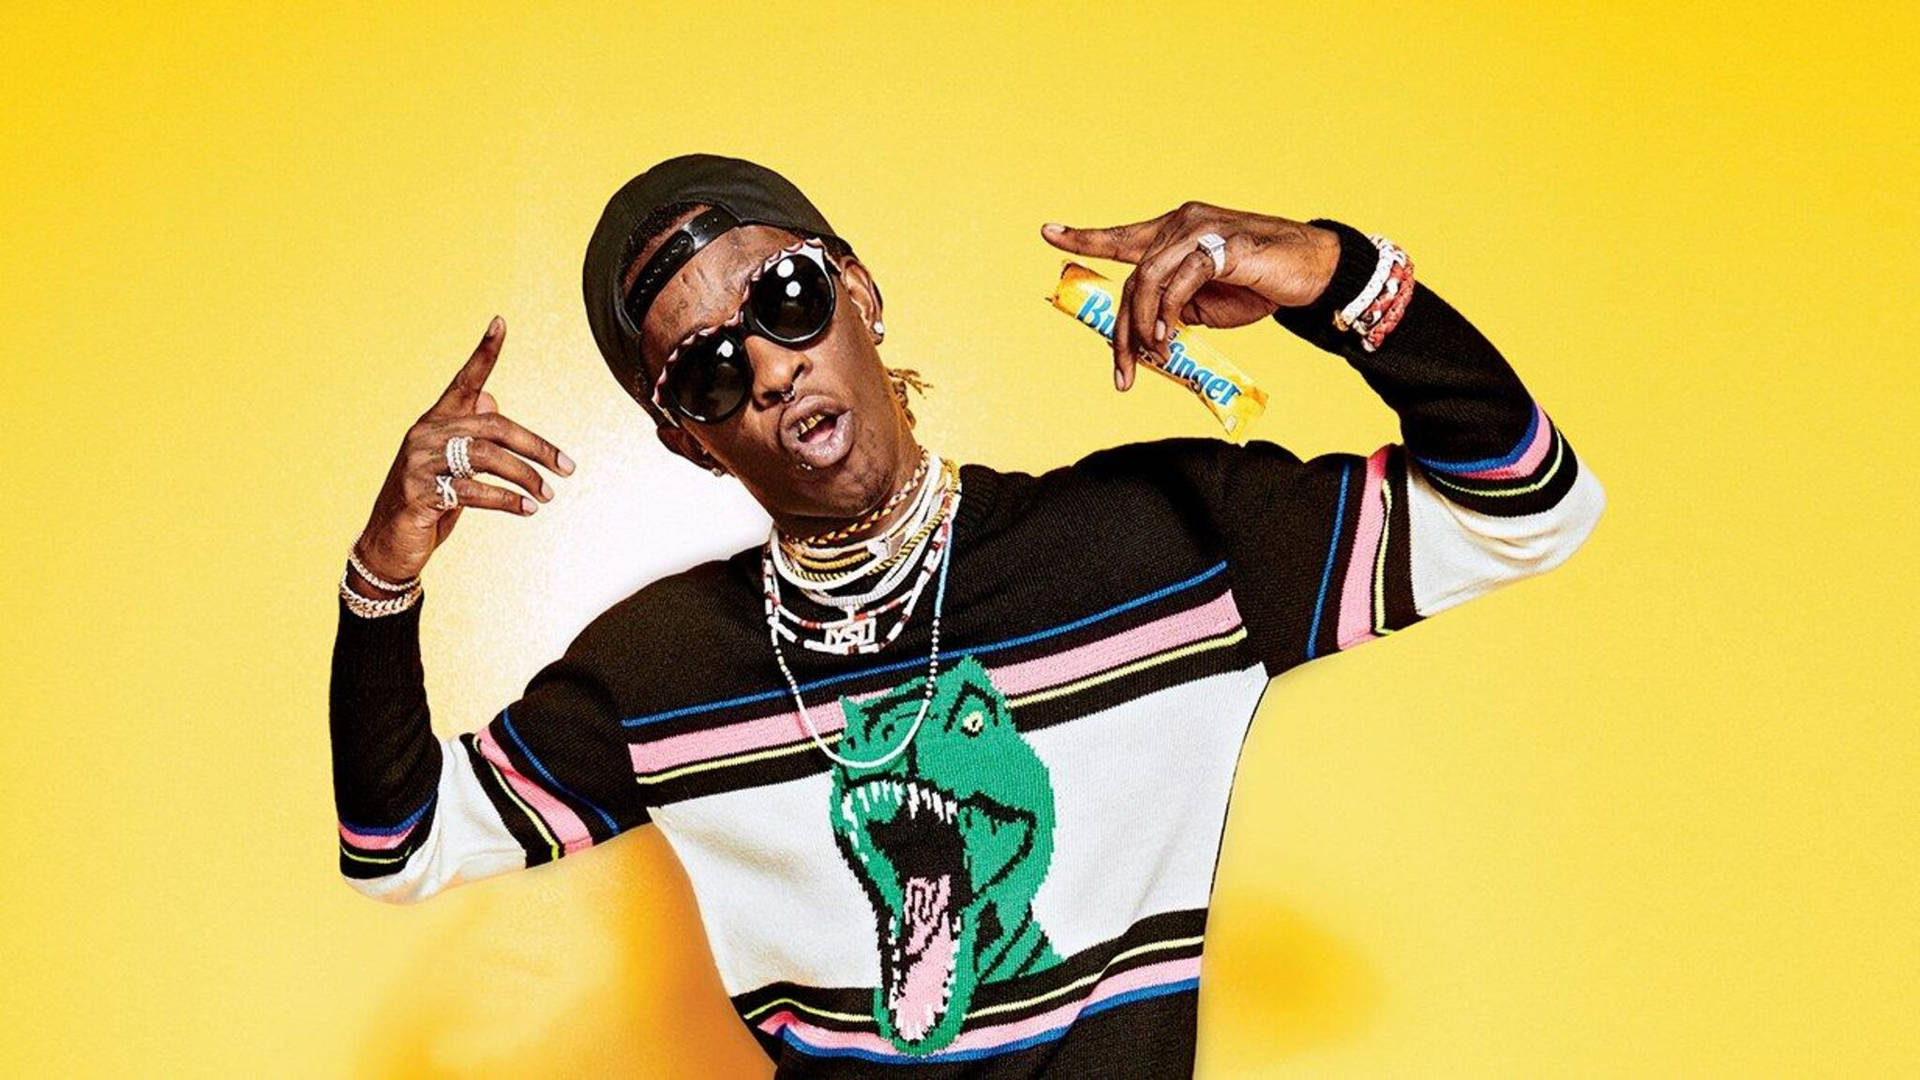 Young Thug holds a Butterfinger candy bar in his hand Wallpaper